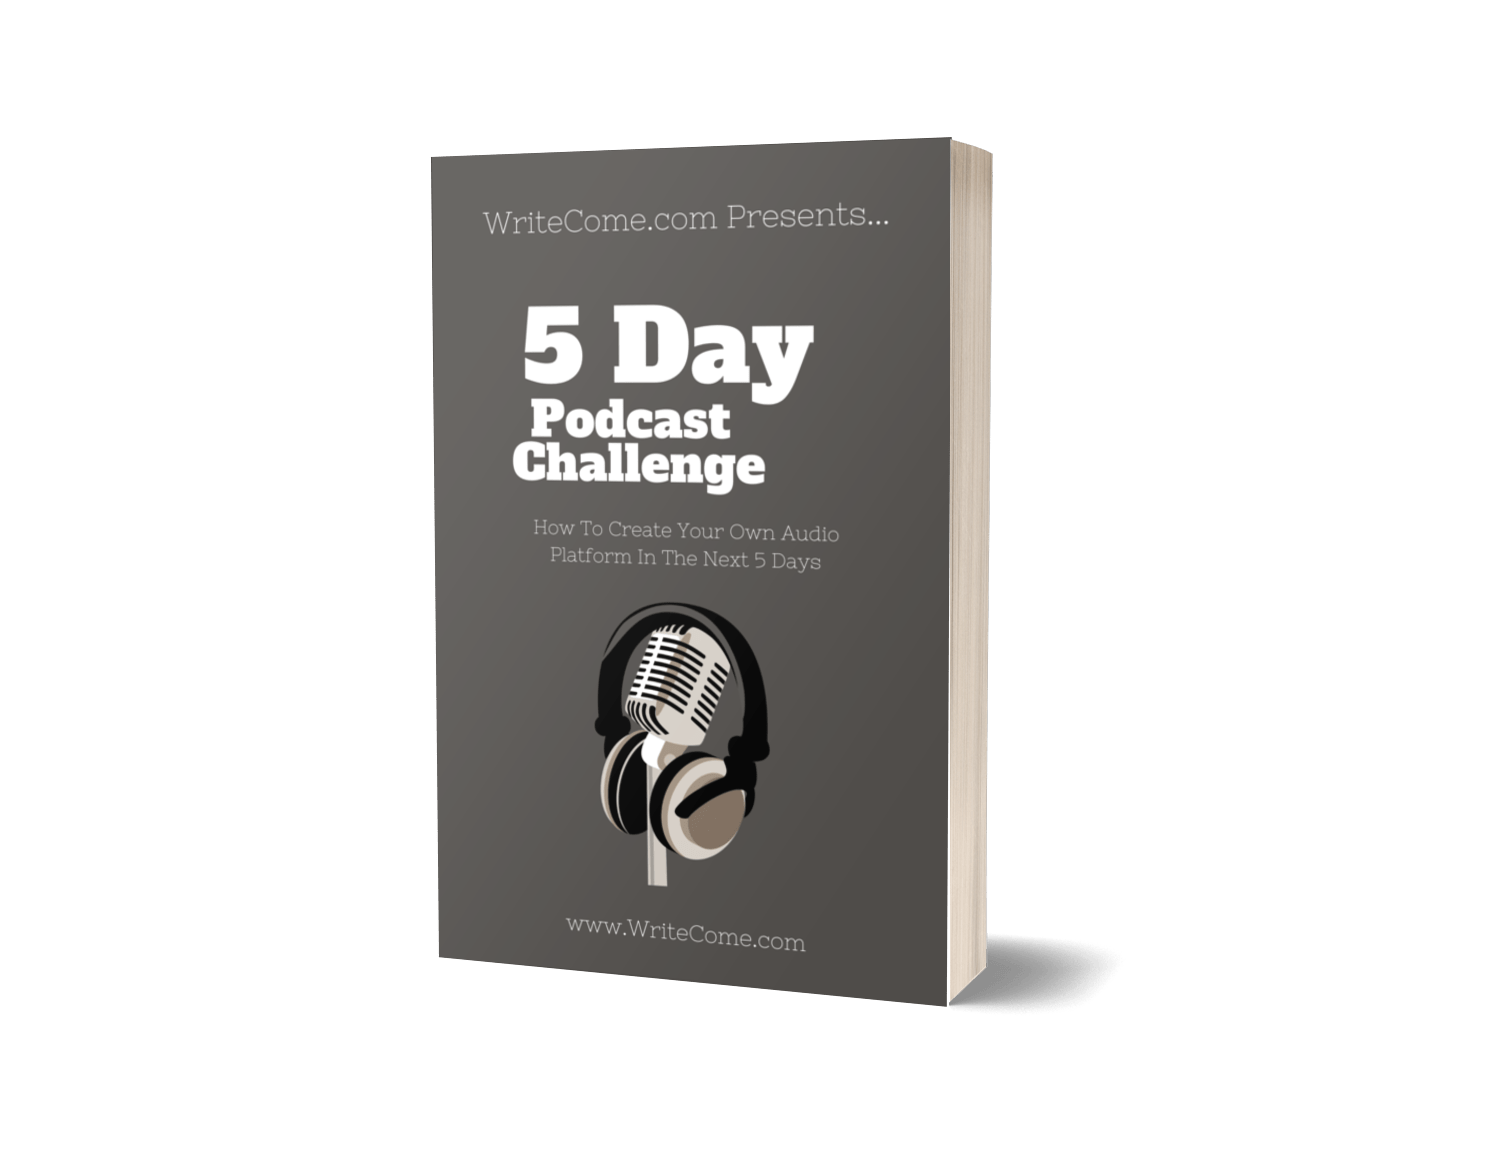 Five Day Podcast Challenge